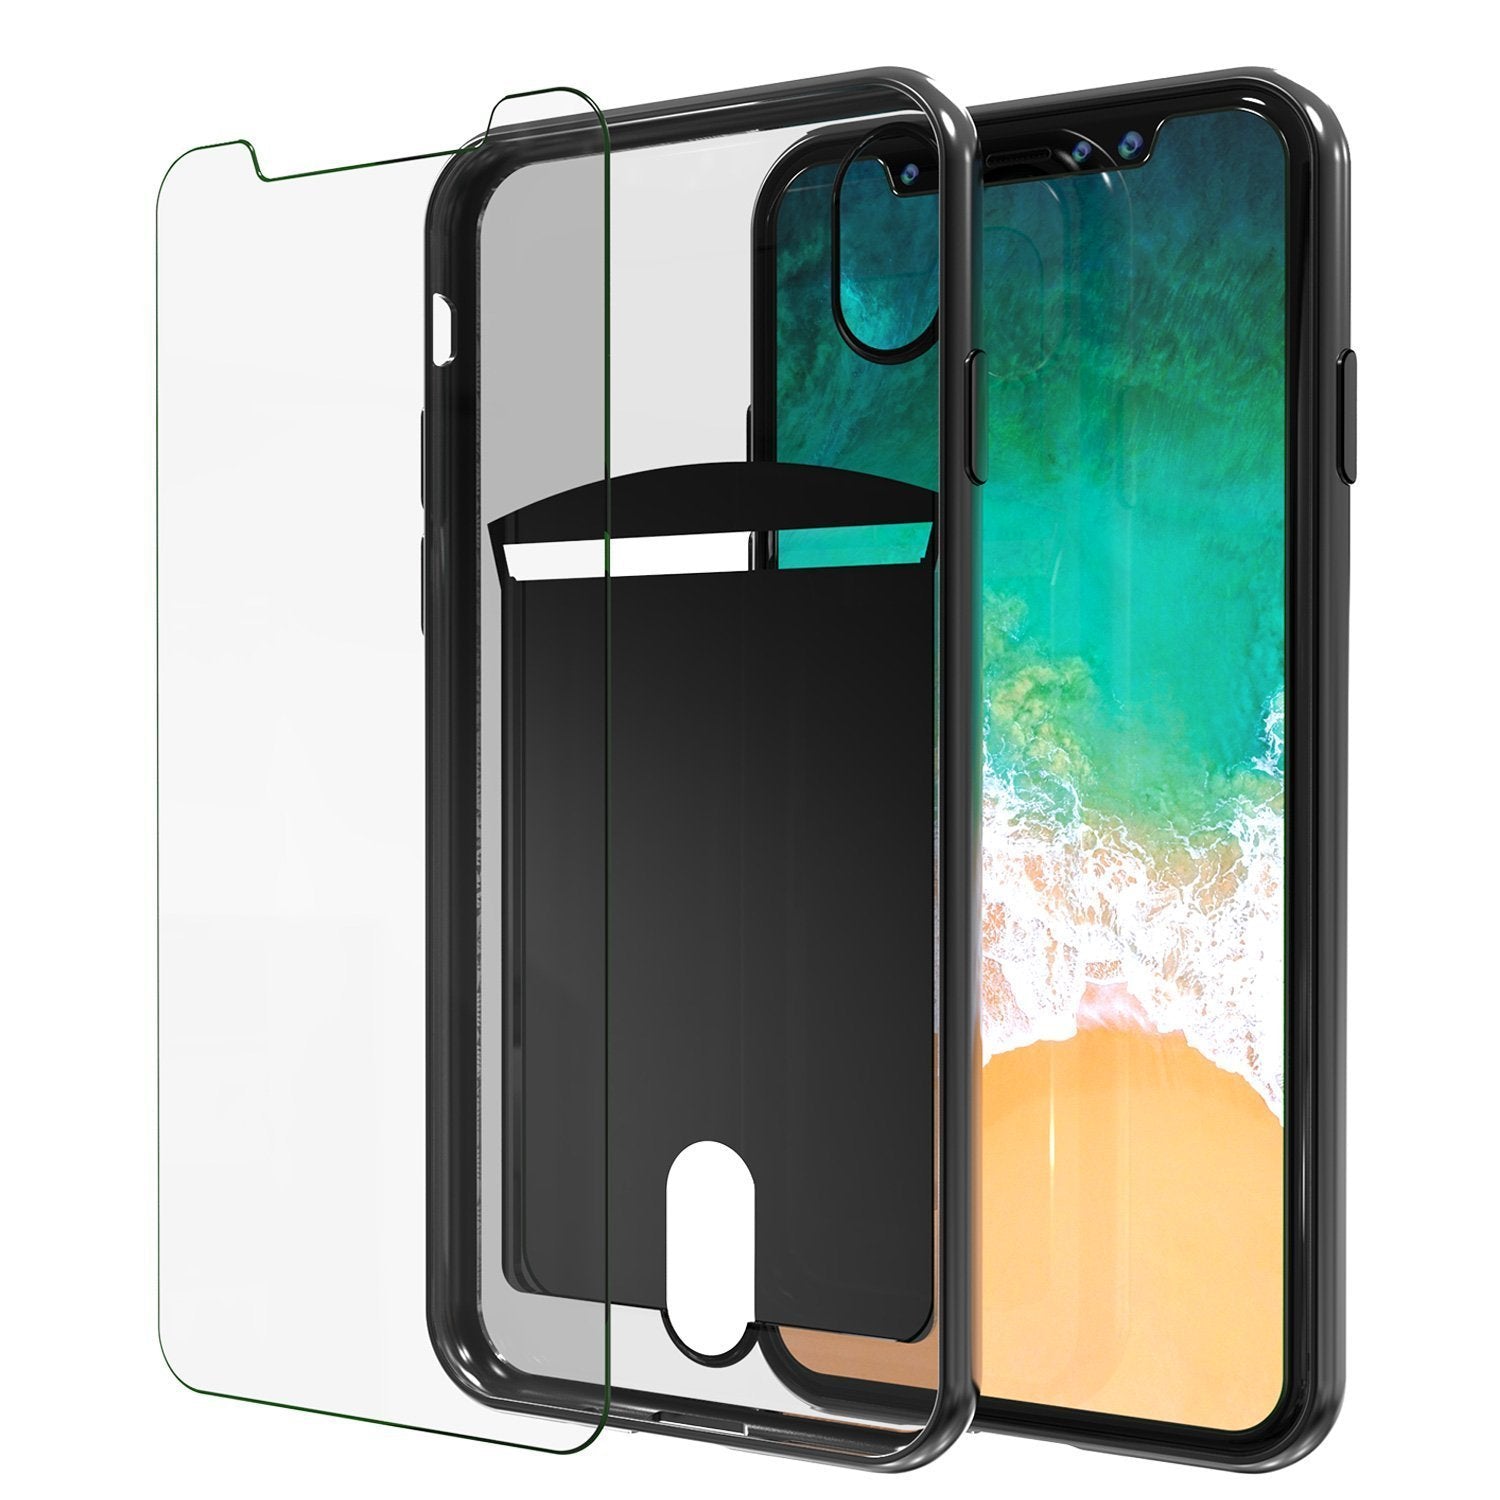 iPhone X Case, PUNKcase [LUCID Series] Slim Fit Protective Dual Layer Armor Cover W/ Scratch Resistant PUNKSHIELD Screen Protector [Black]